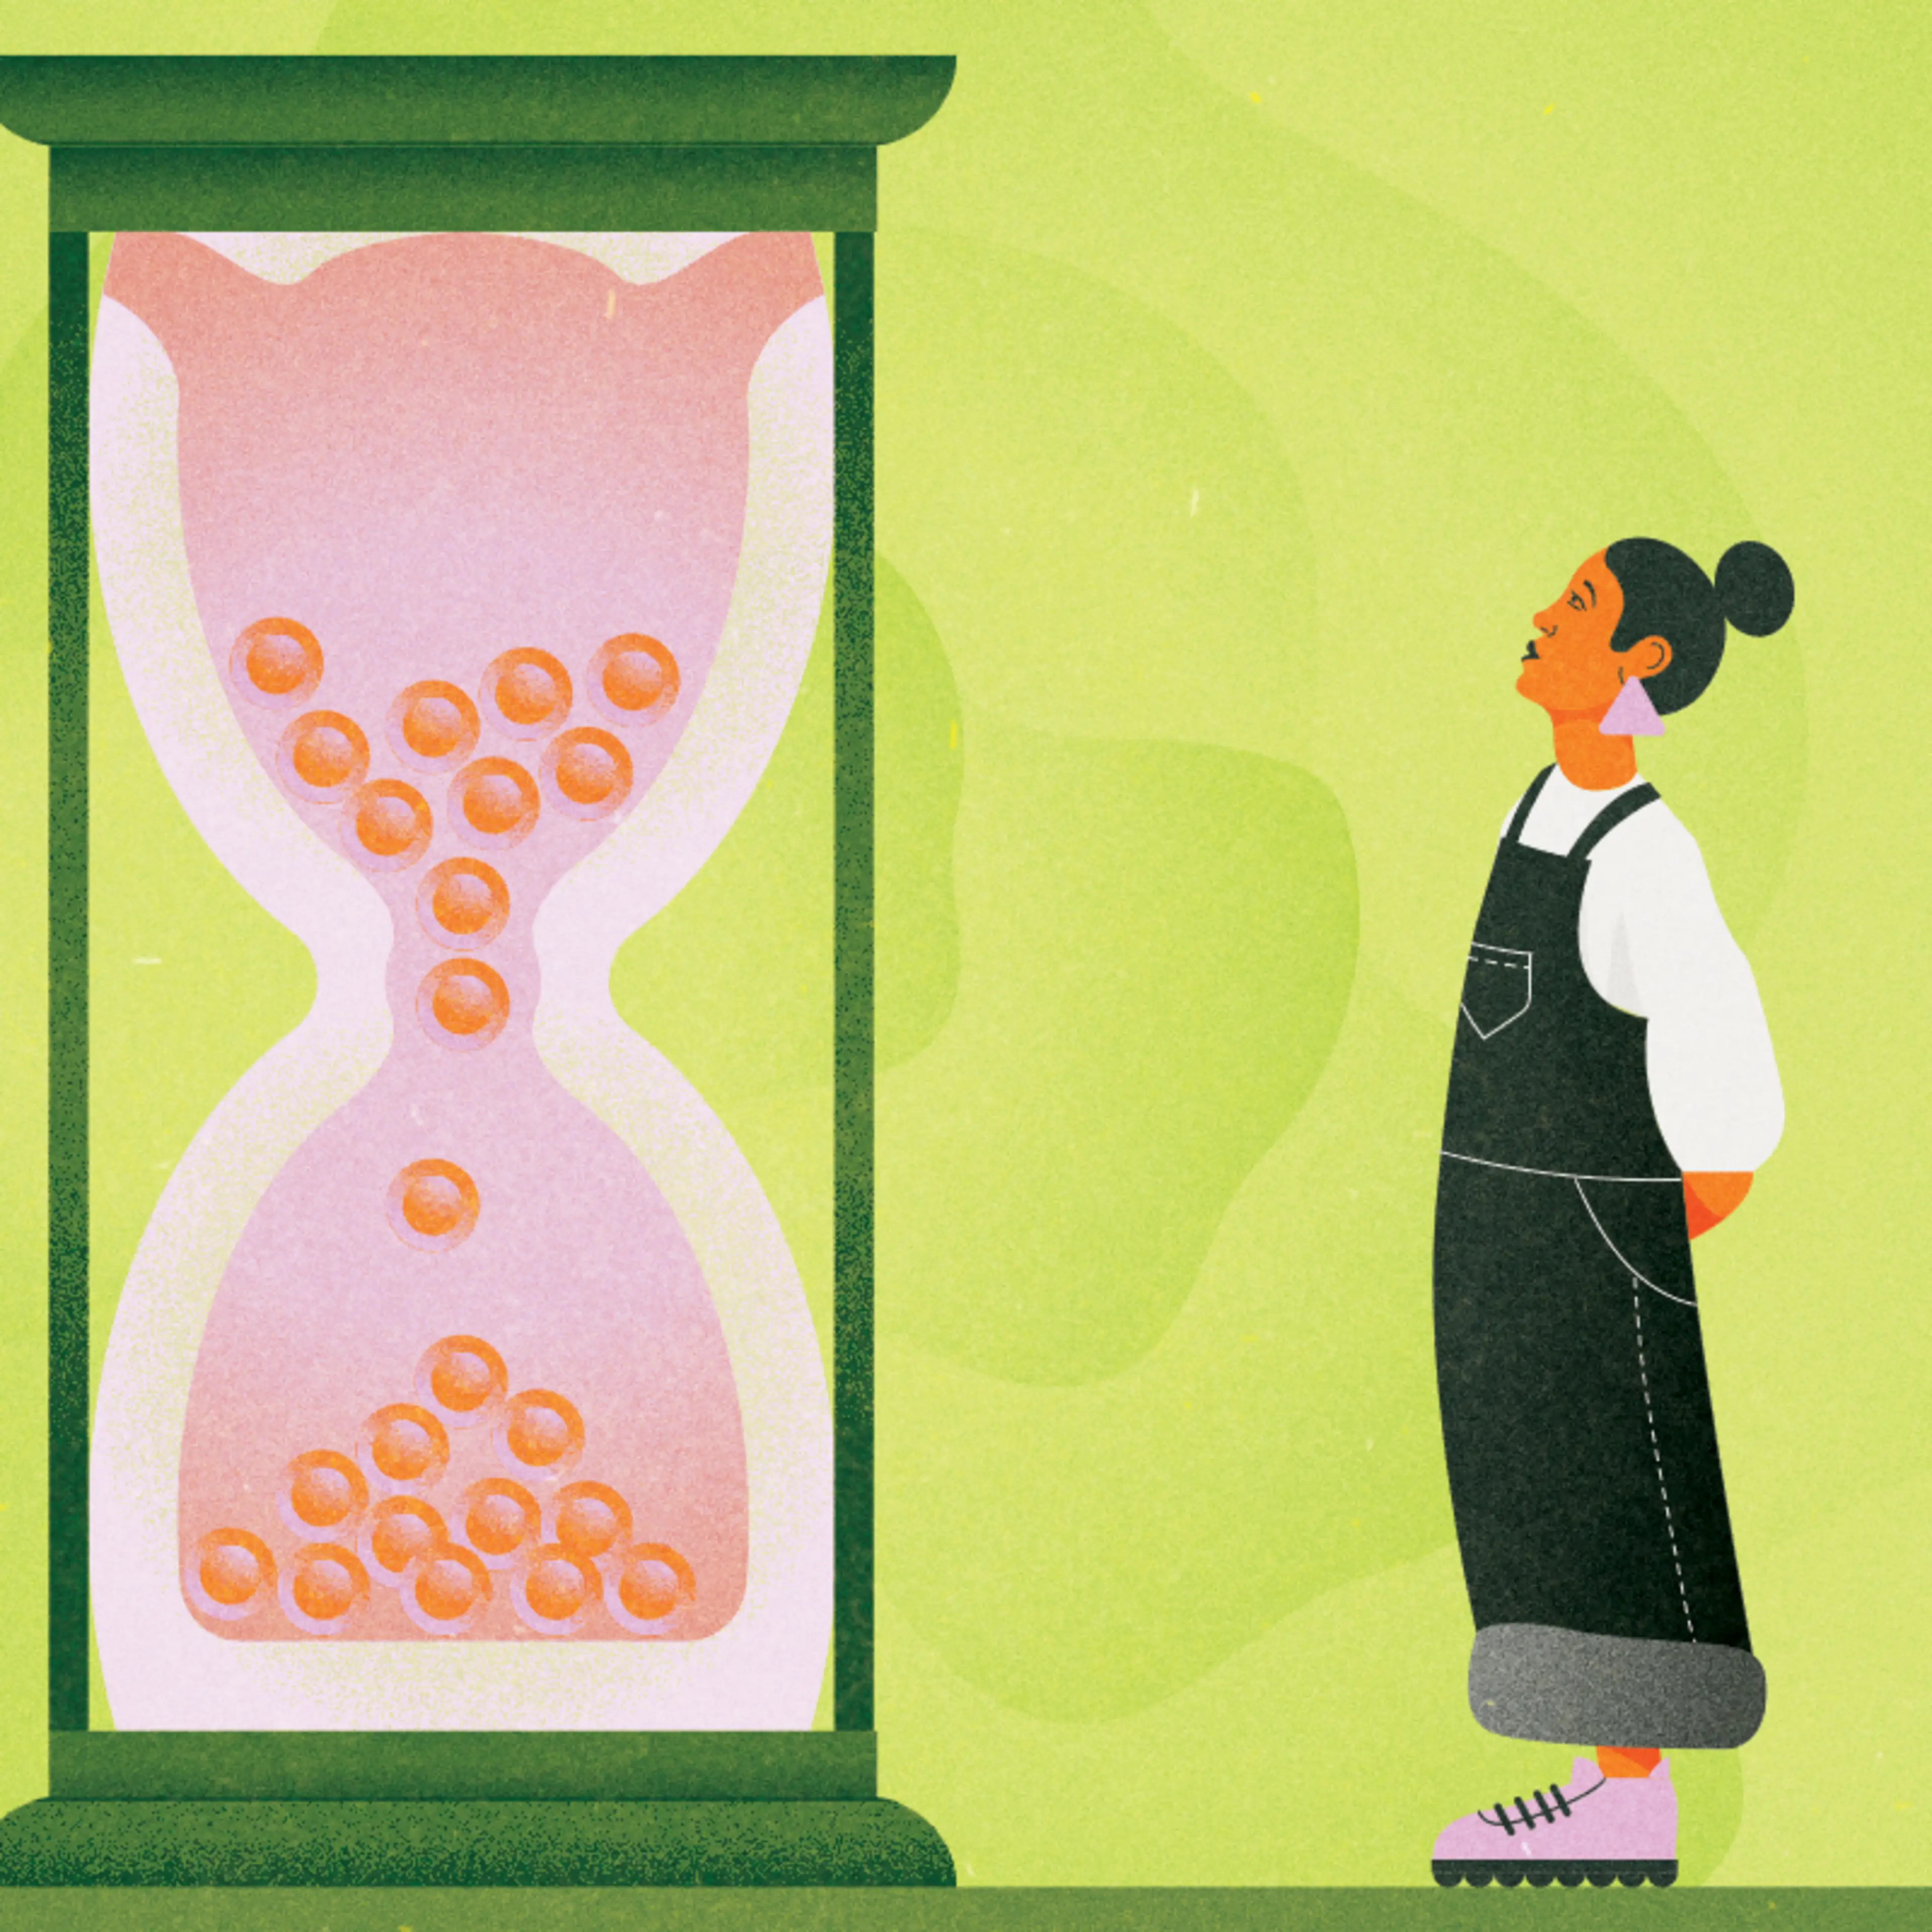 The Definitive Guide to Freezing Your Eggs